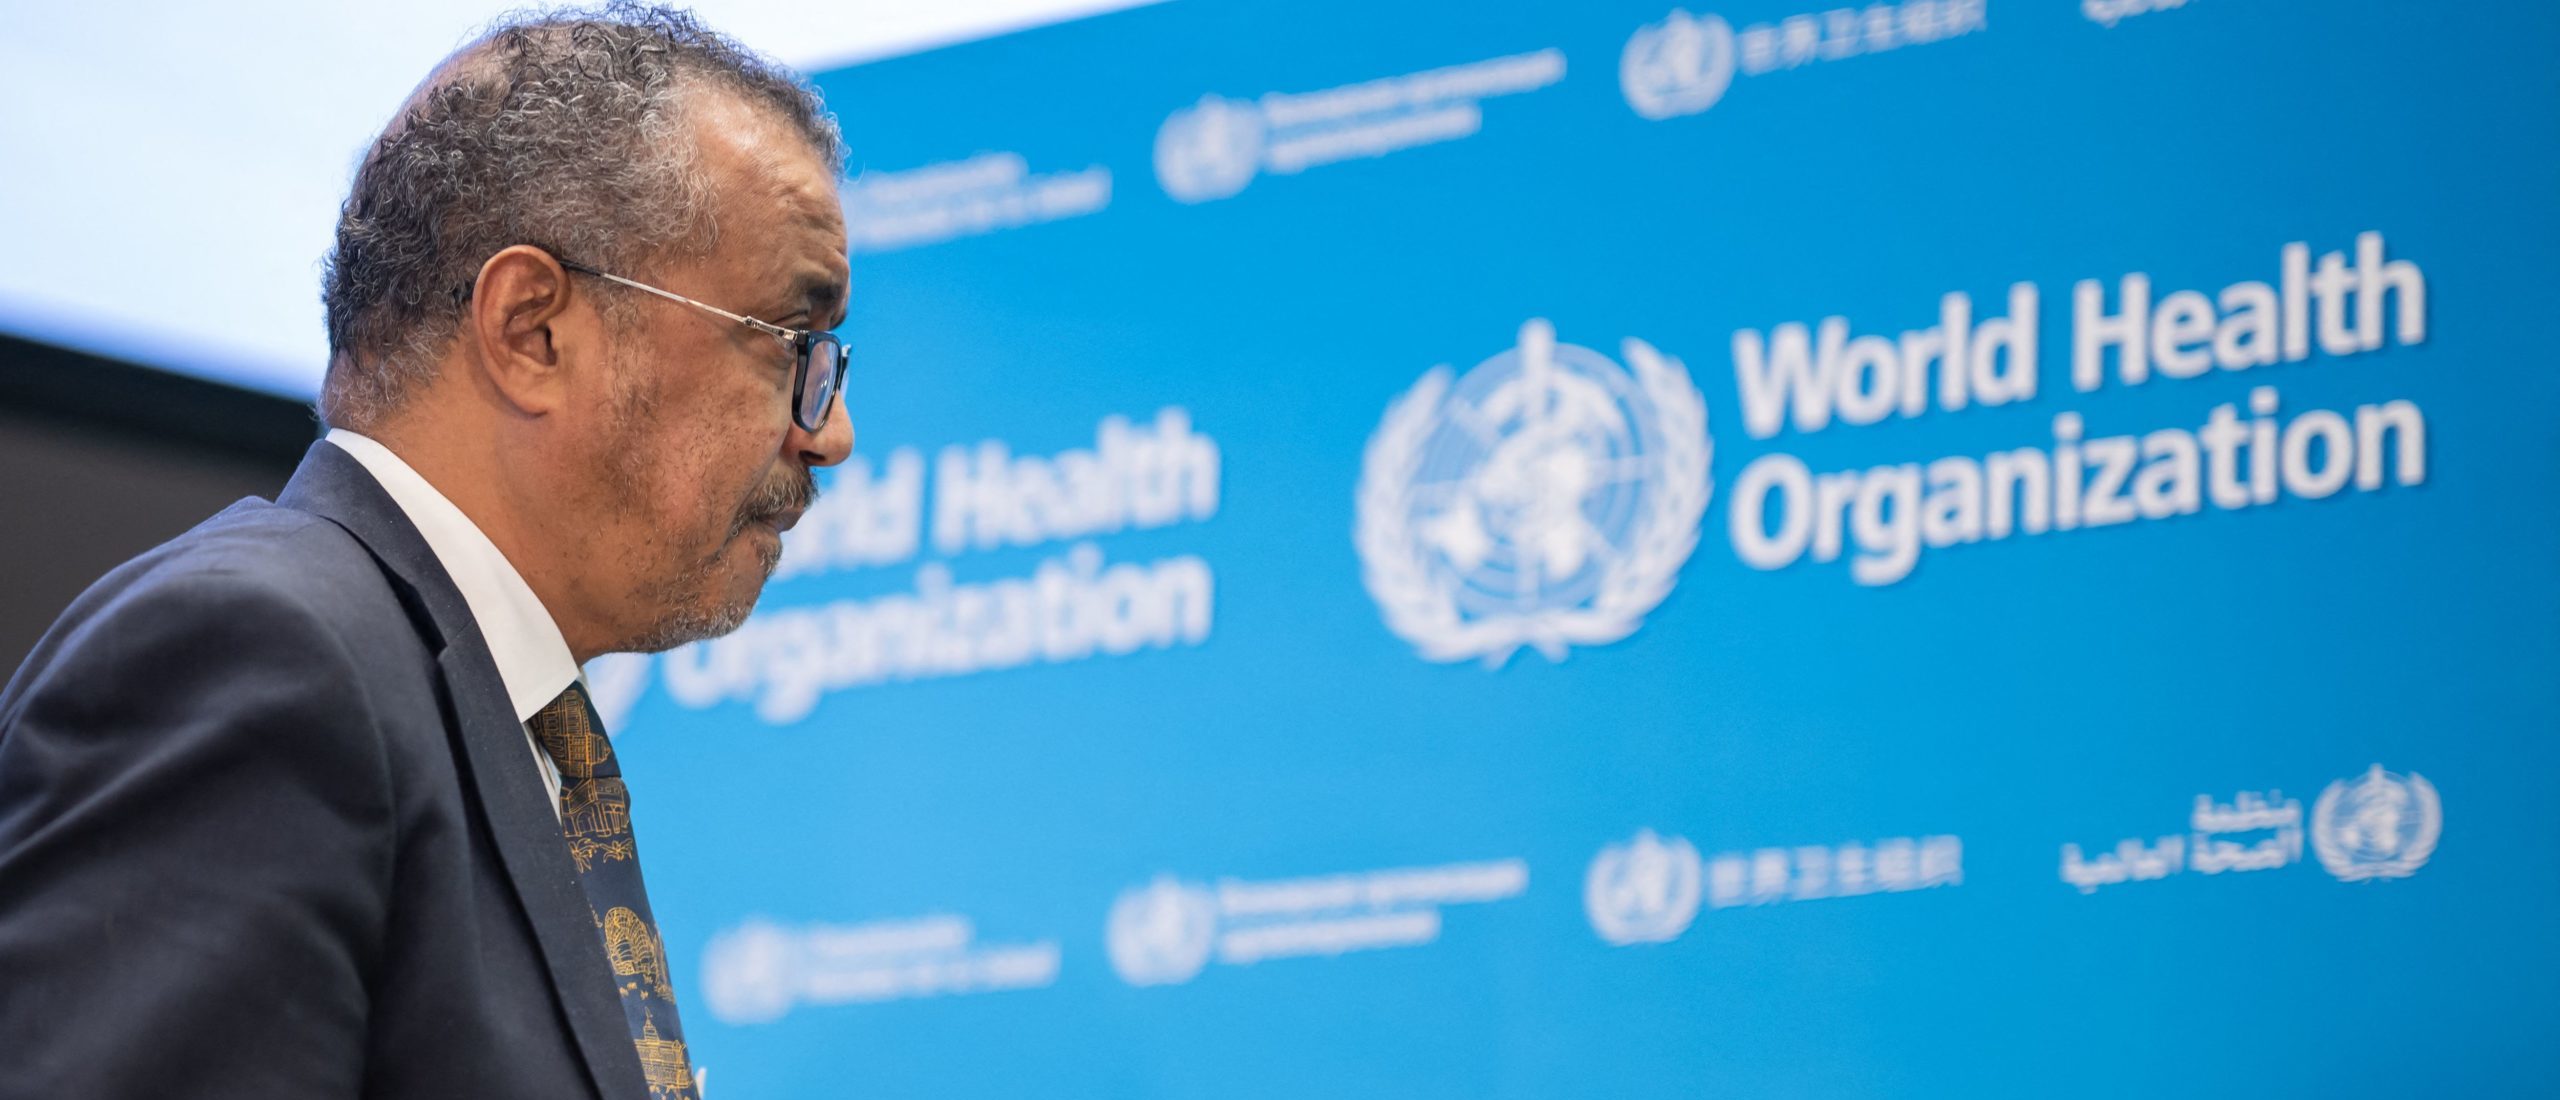 WHO Director-General Tedros Adhanom Ghebreyesus leaves a press conference at the World Health Organization's headquarters in Geneva, on December 14, 2022. (Photo by FABRICE COFFRINI/AFP via Getty Images)